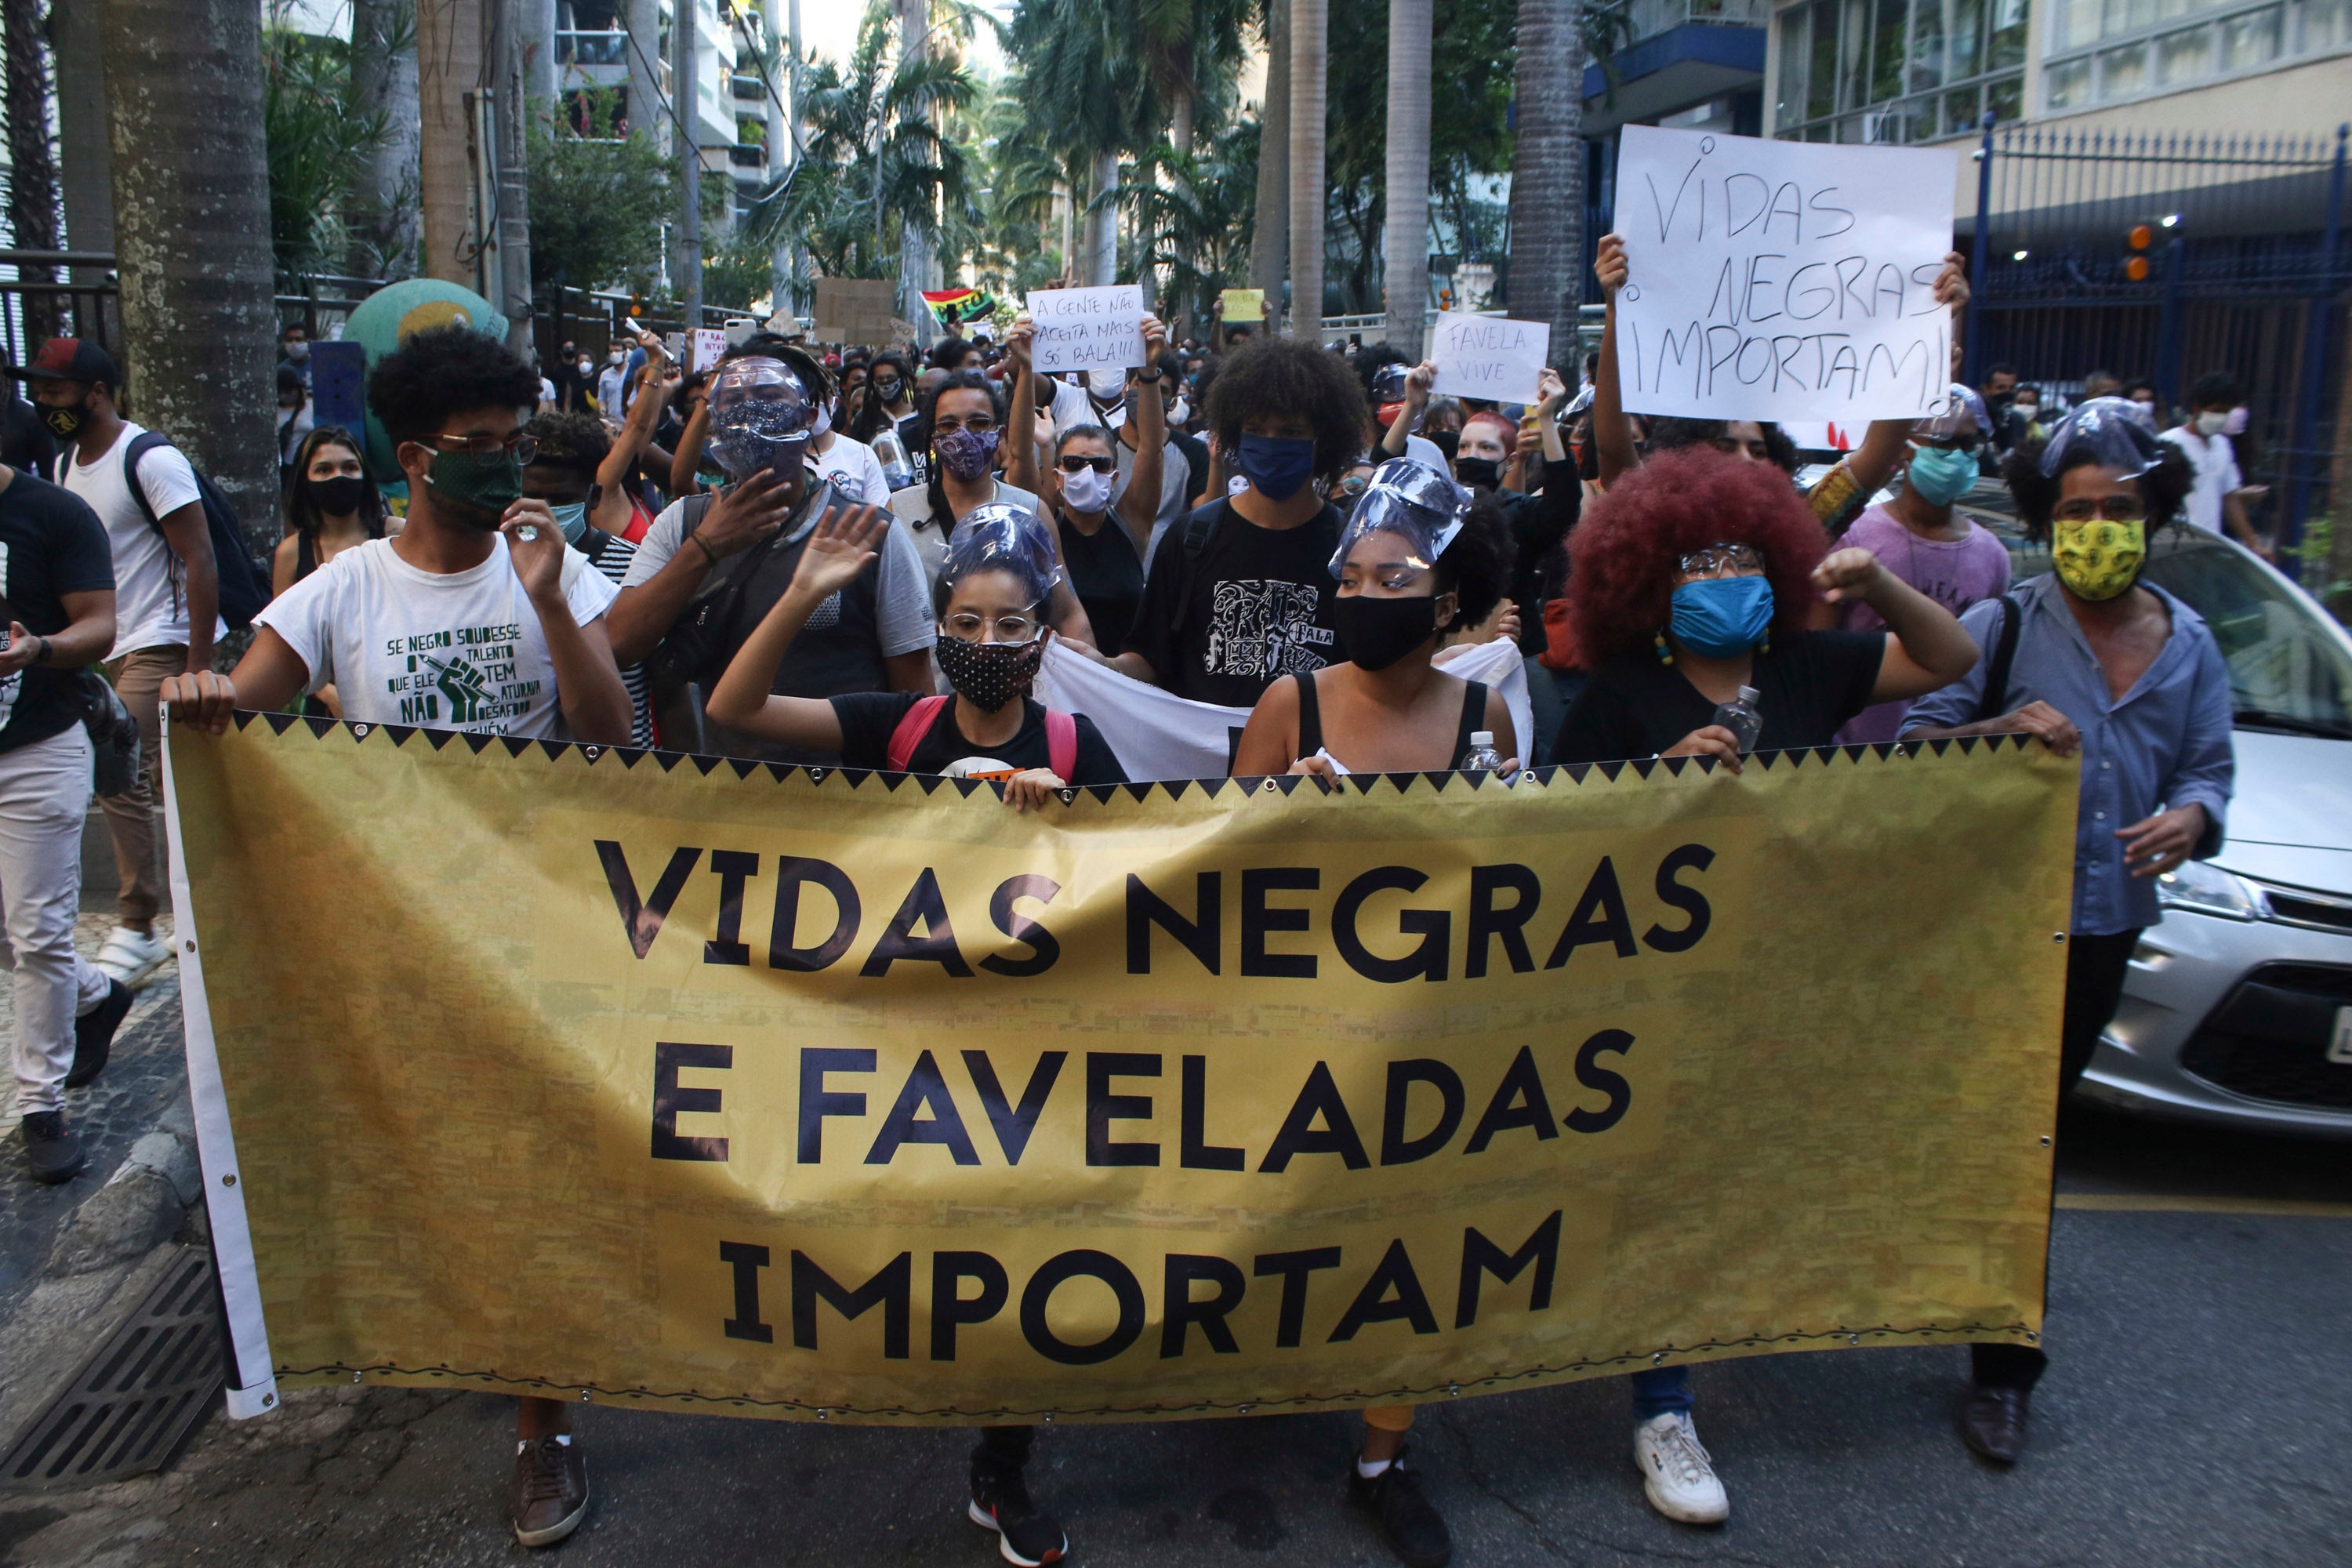 People protest against police killings in front of the Guanabara Palace, the residence of the Rio de Janeiro State Governor, on May 31, 2020. One sign reads “Black Lives Matter.”